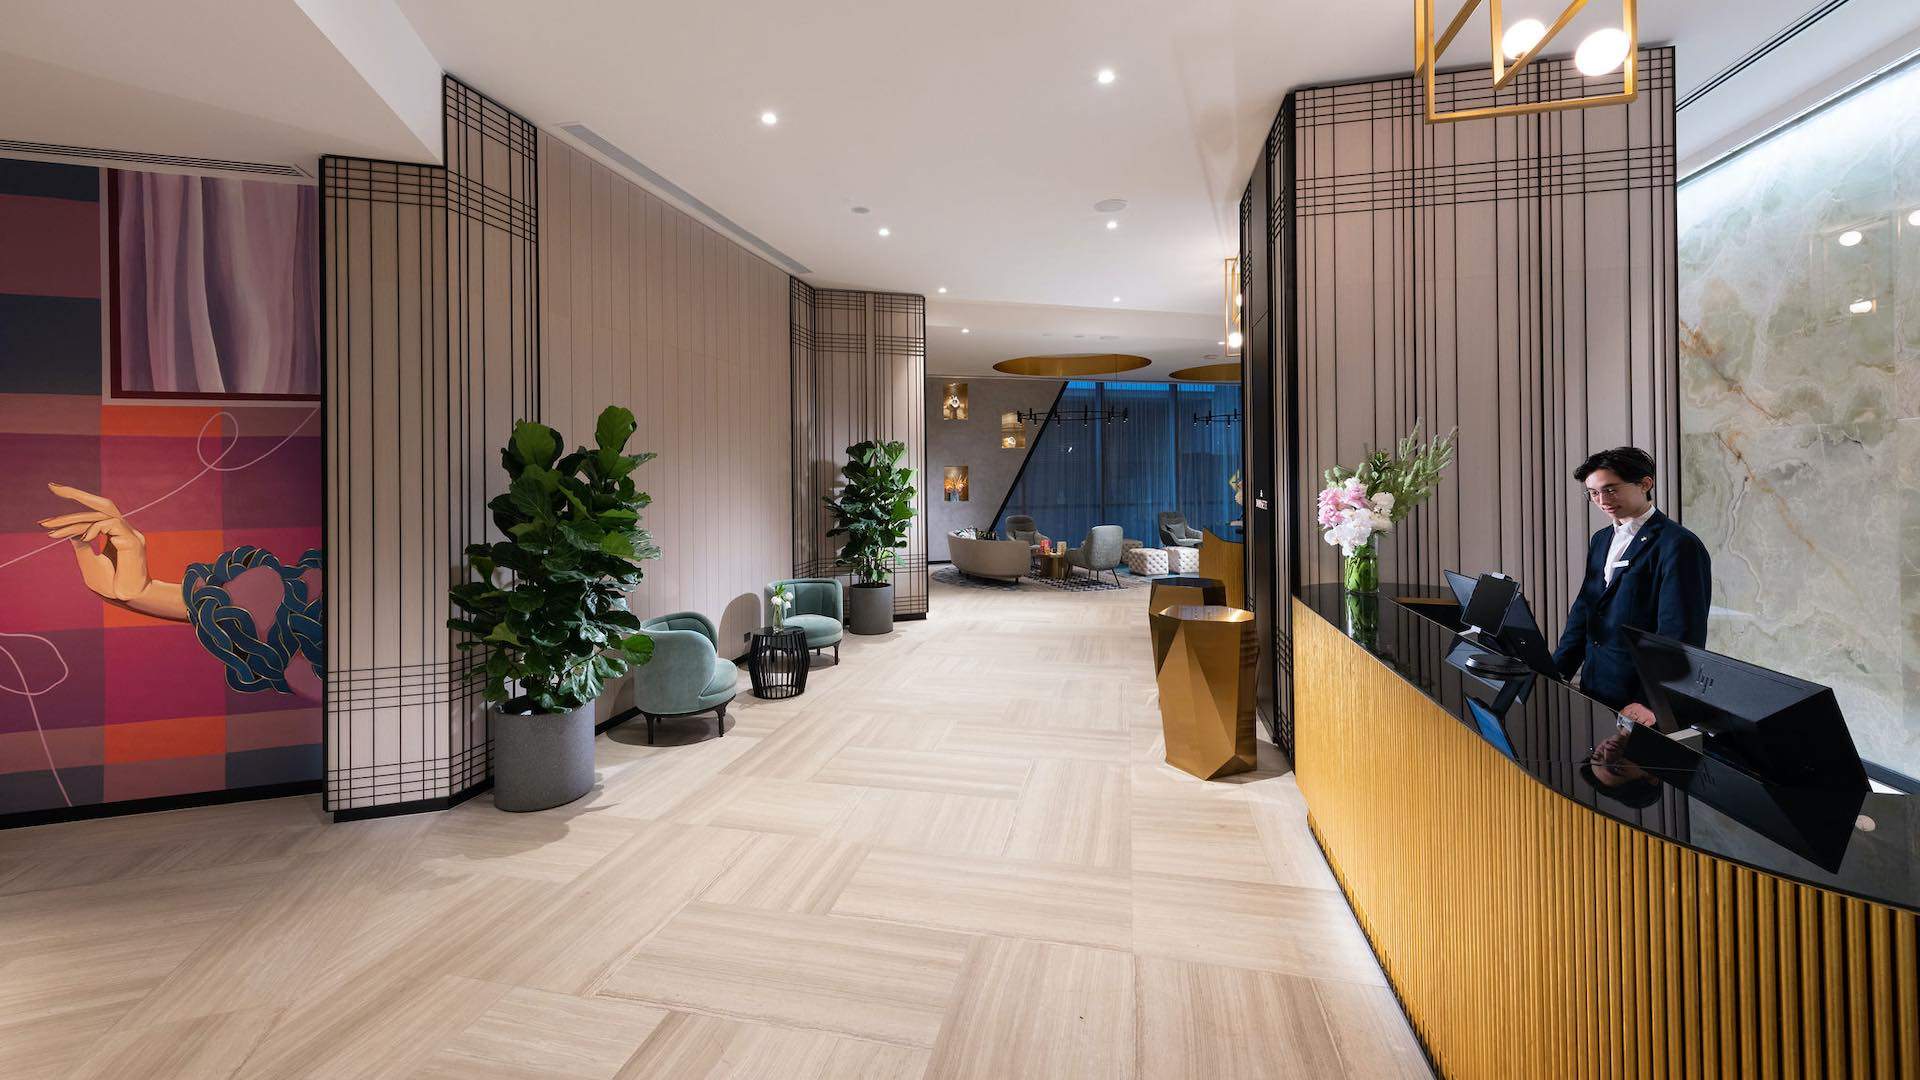 We're Giving Away an All-Inclusive Stay For Two at Dorsett Melbourne